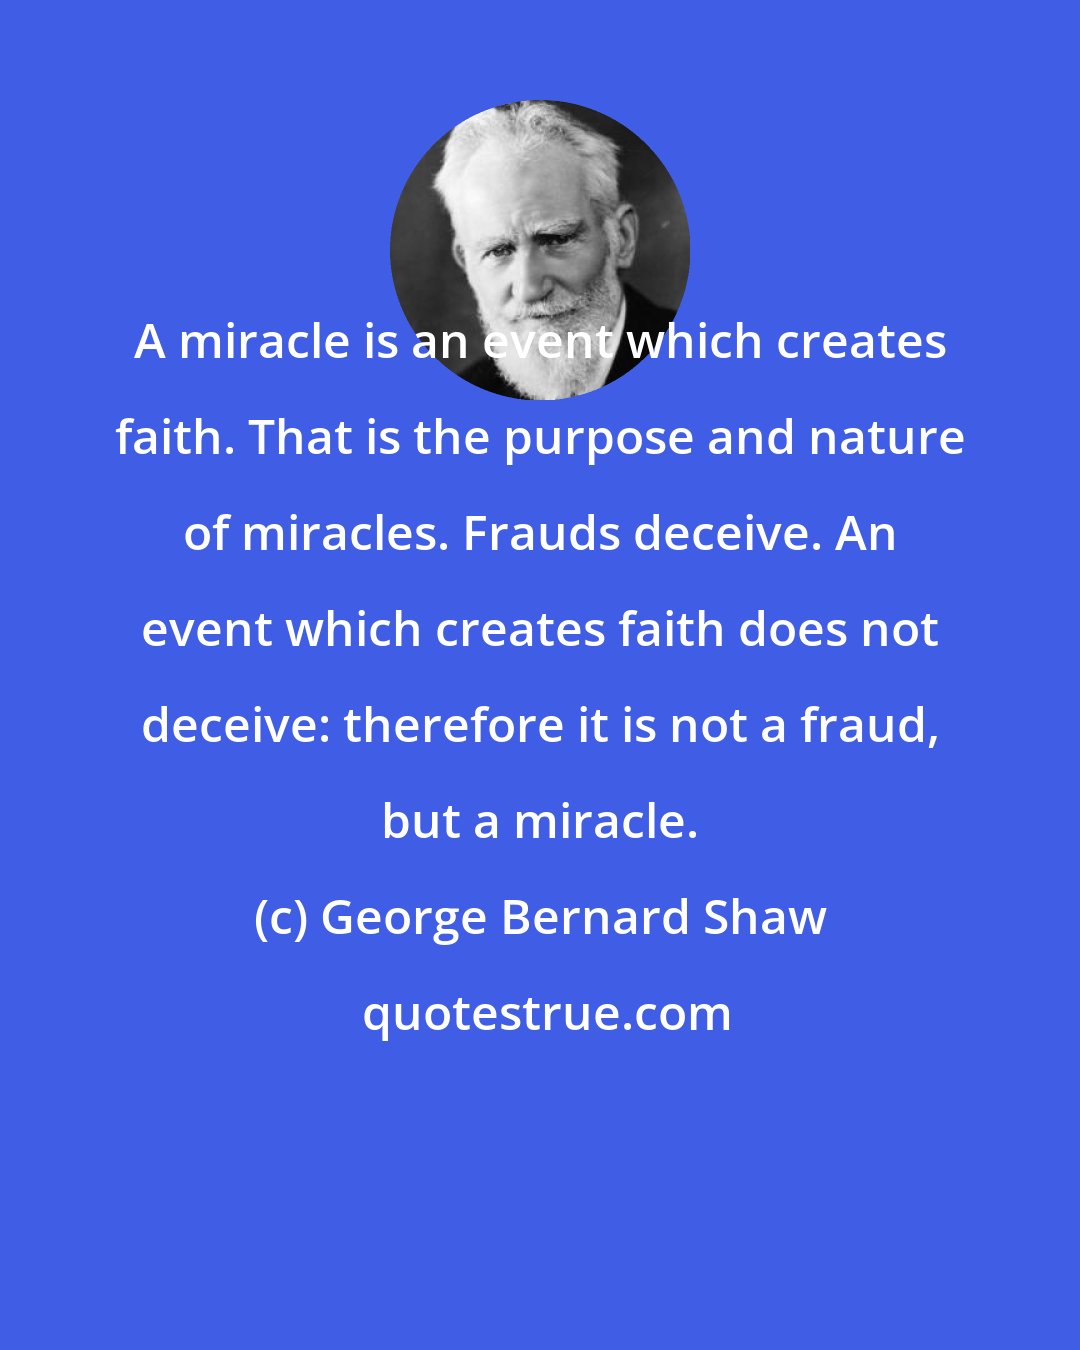 George Bernard Shaw: A miracle is an event which creates faith. That is the purpose and nature of miracles. Frauds deceive. An event which creates faith does not deceive: therefore it is not a fraud, but a miracle.